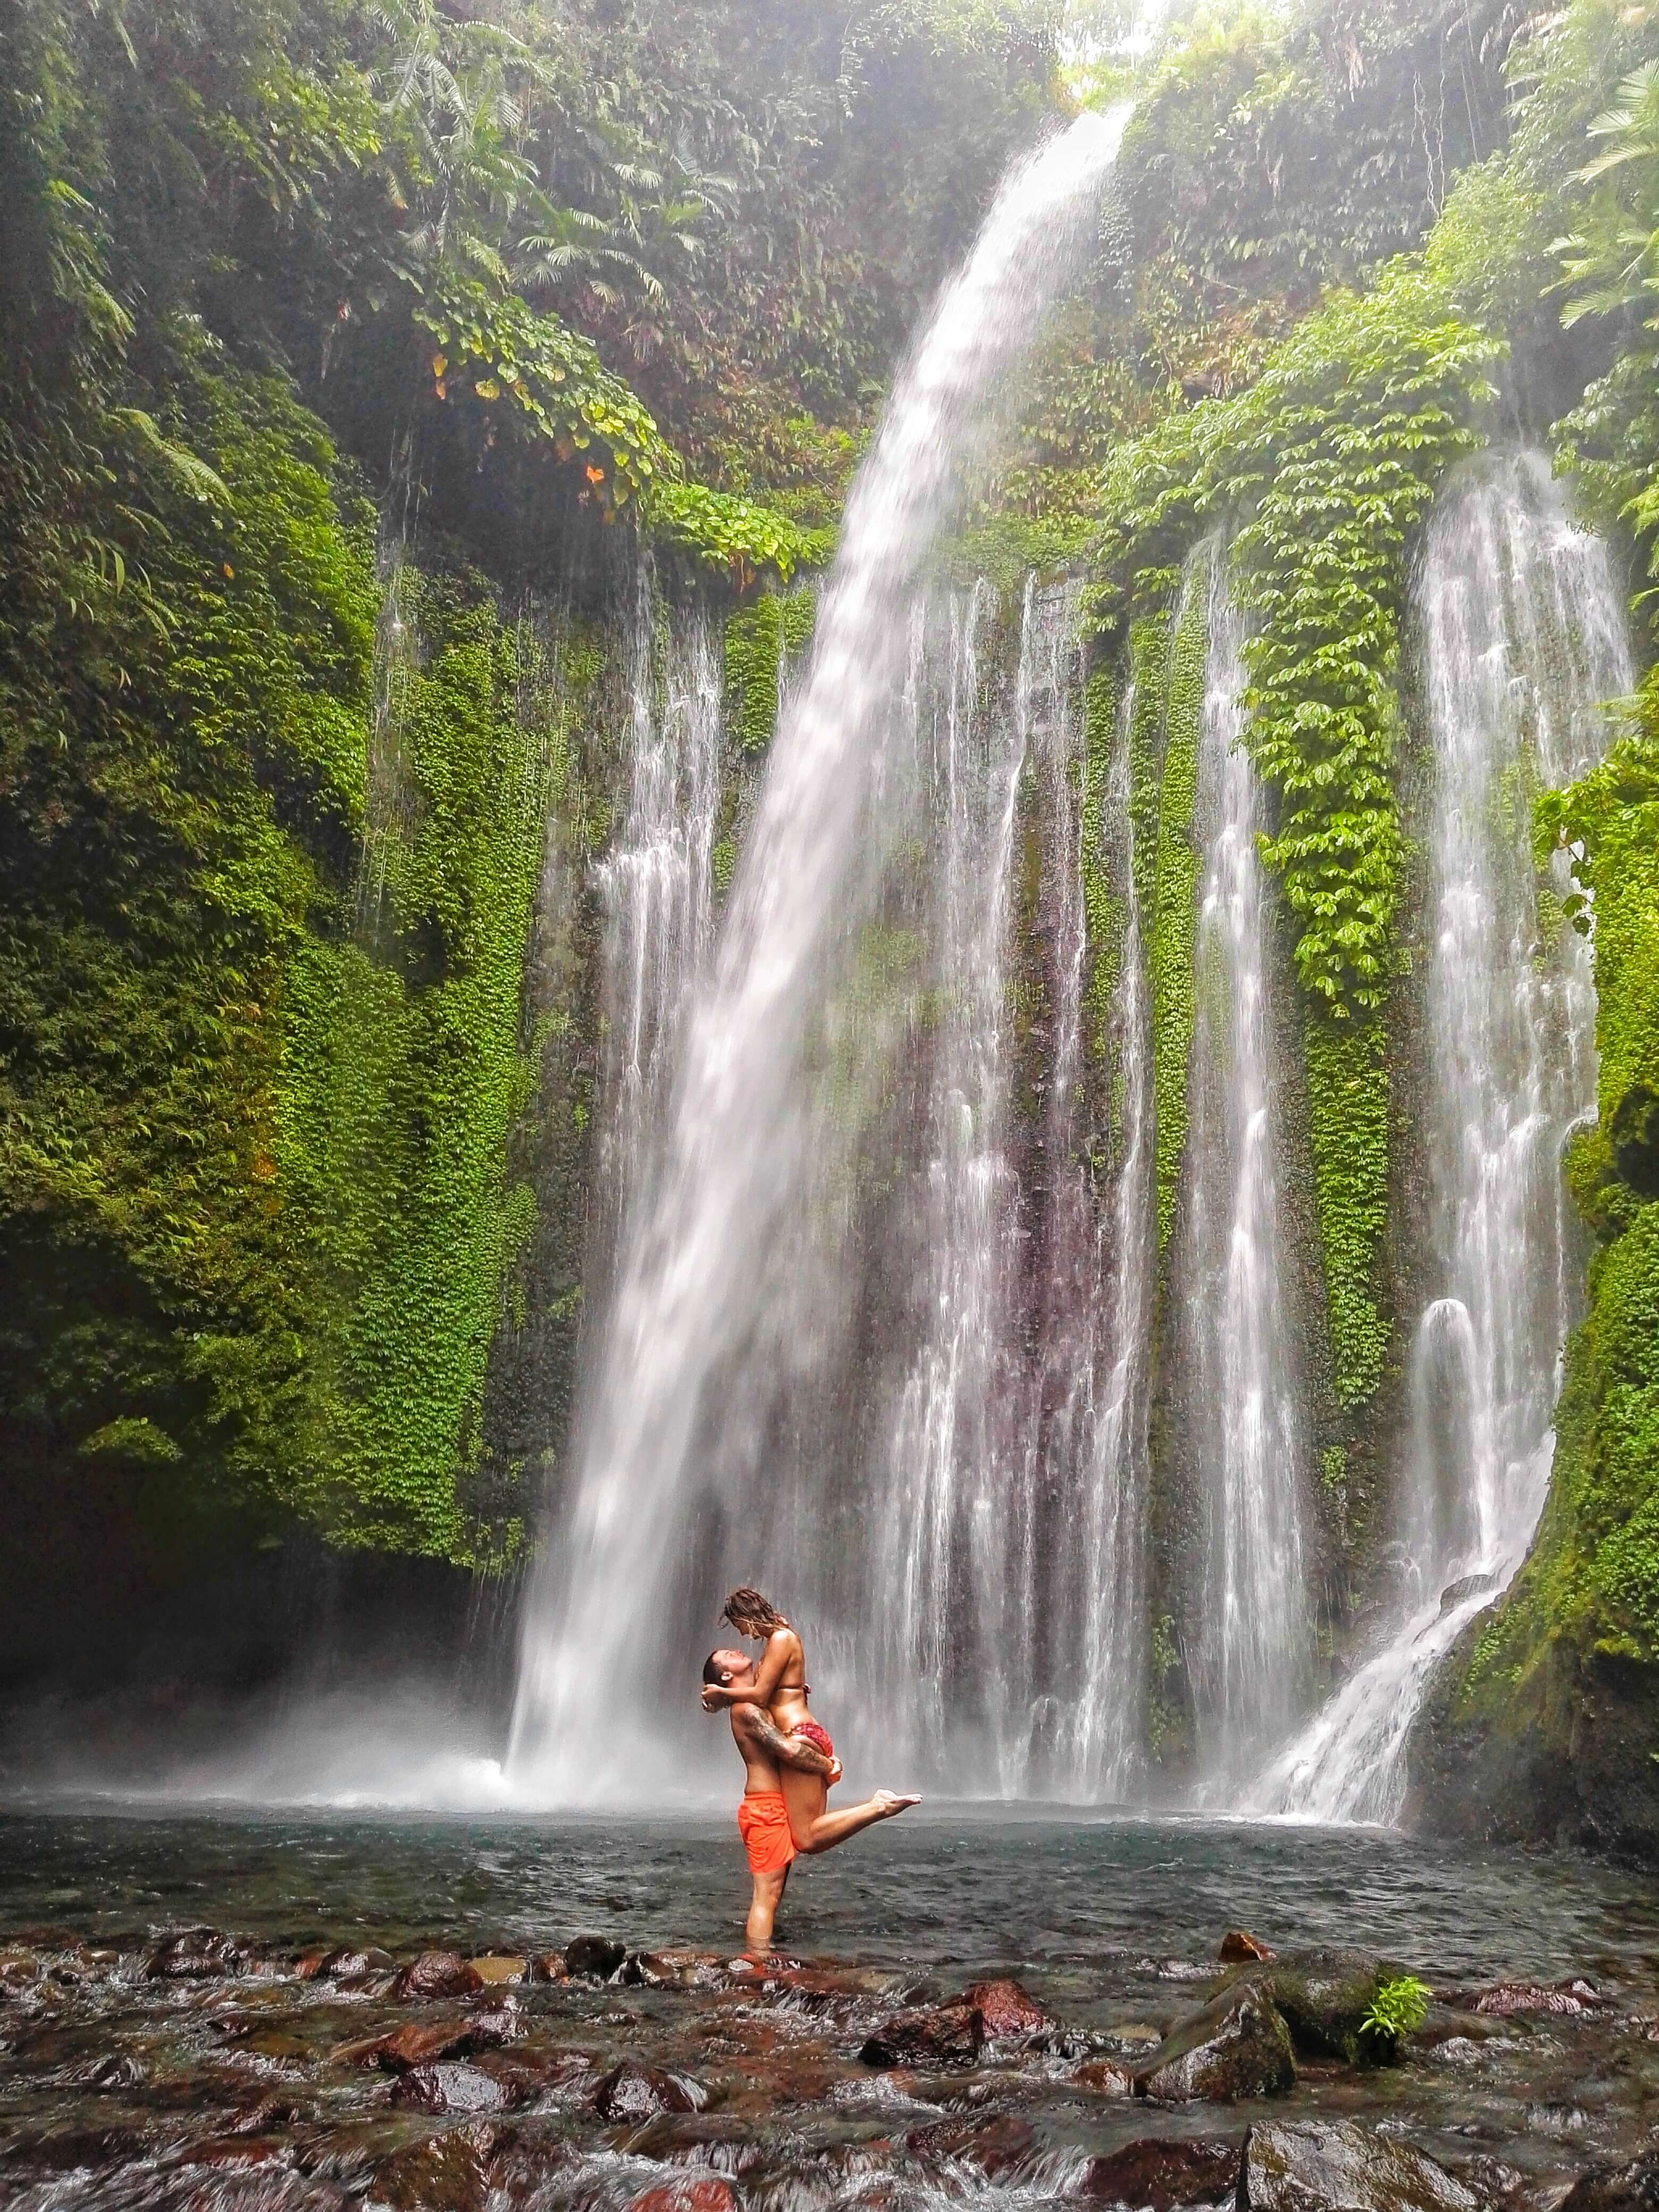 How to Find the Lombok waterfall